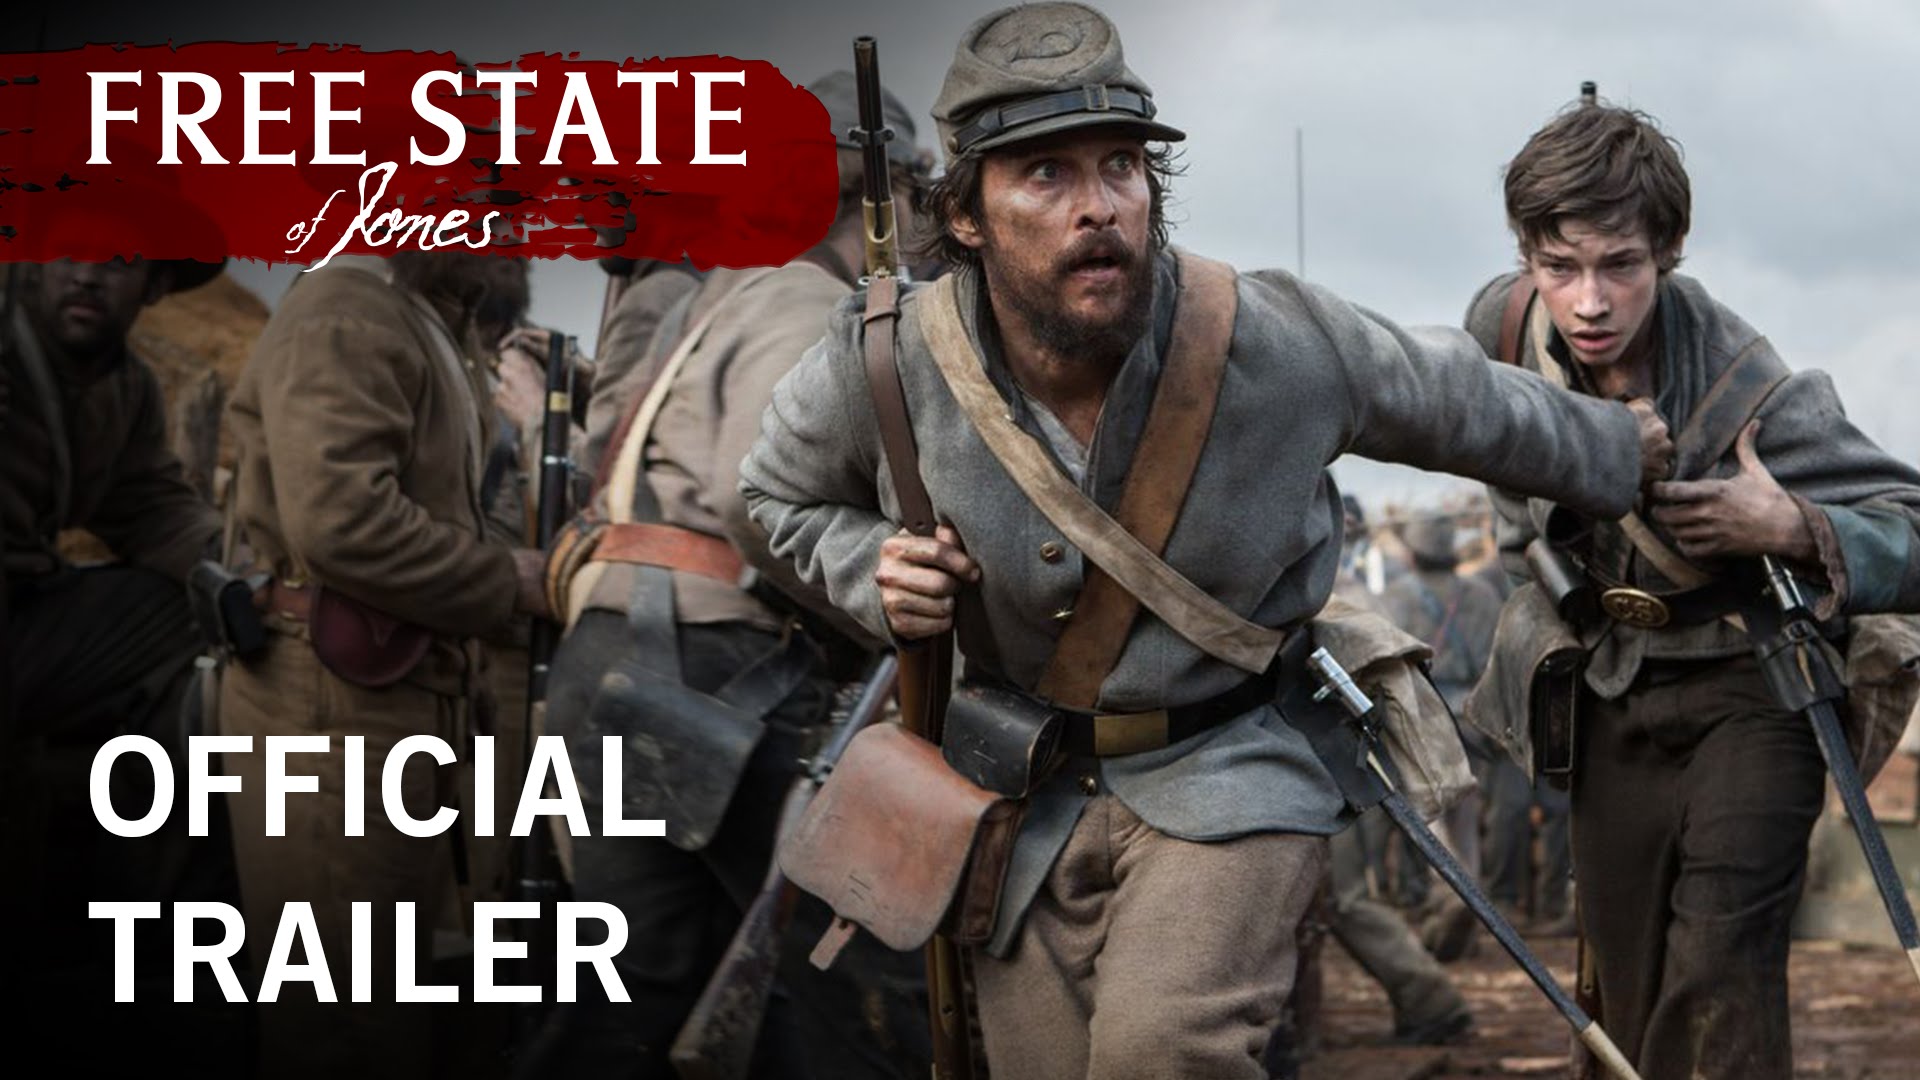 Free State Of Jones Backgrounds, Compatible - PC, Mobile, Gadgets| 1920x1080 px